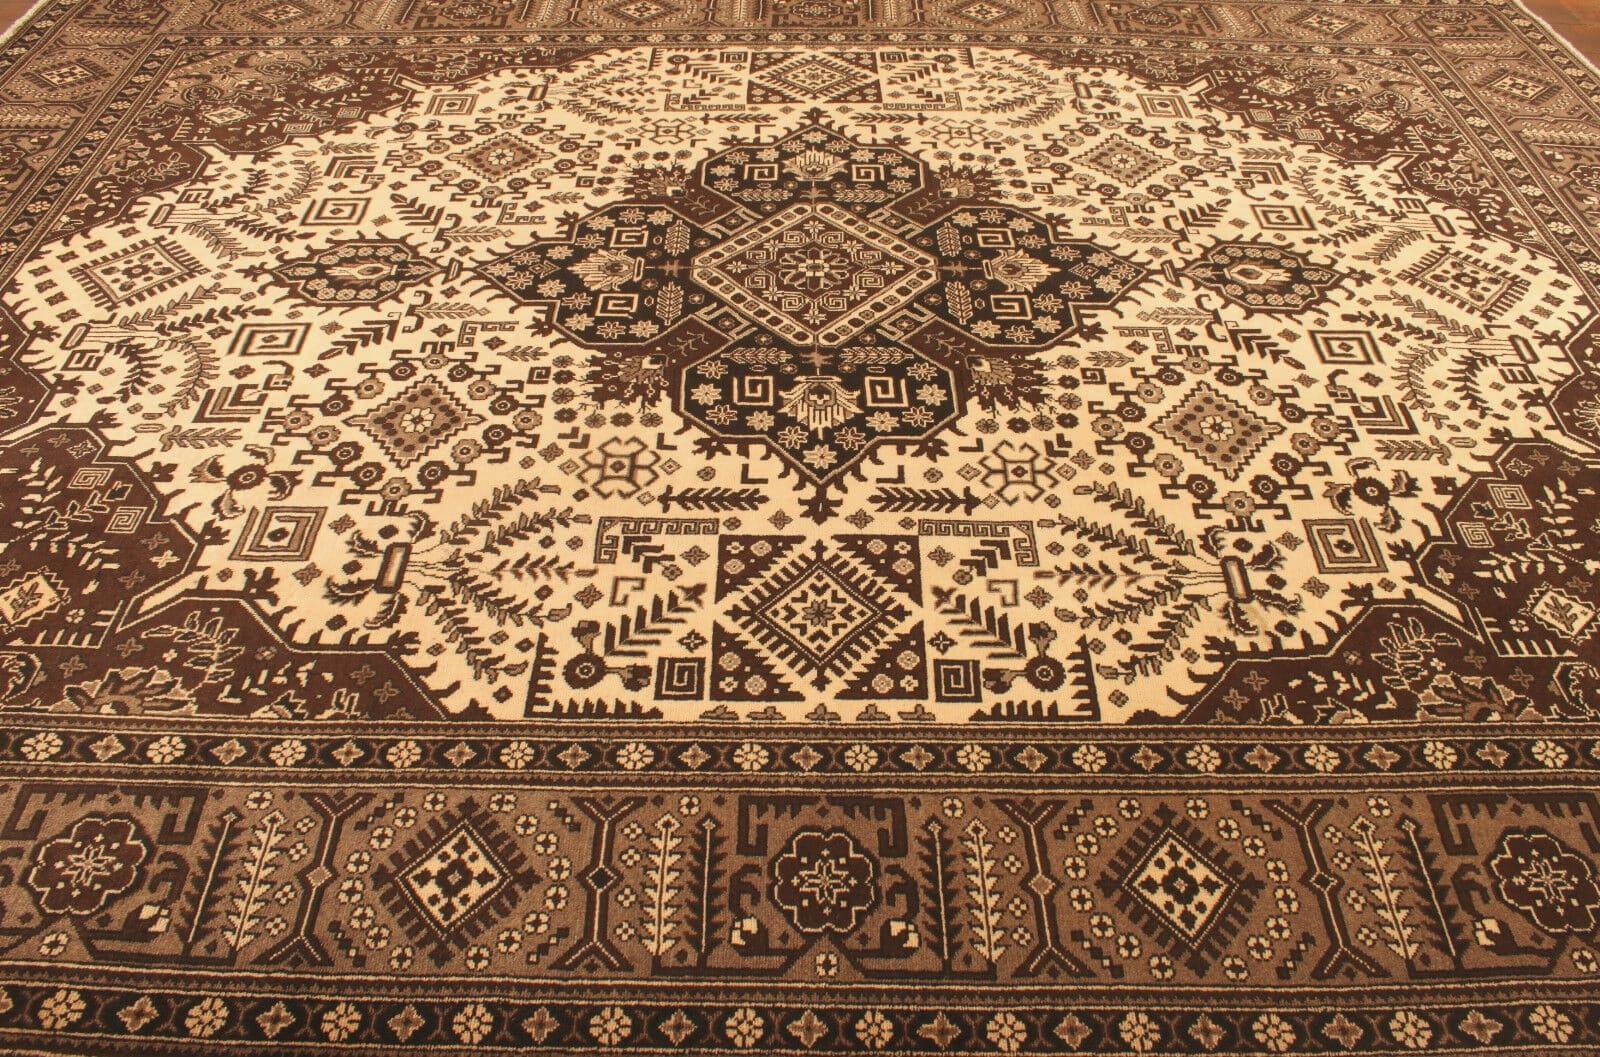 Handmade Vintage Persian Style Tabriz Rug 10' x 12.8', 1970s - 1T40 For Sale 2